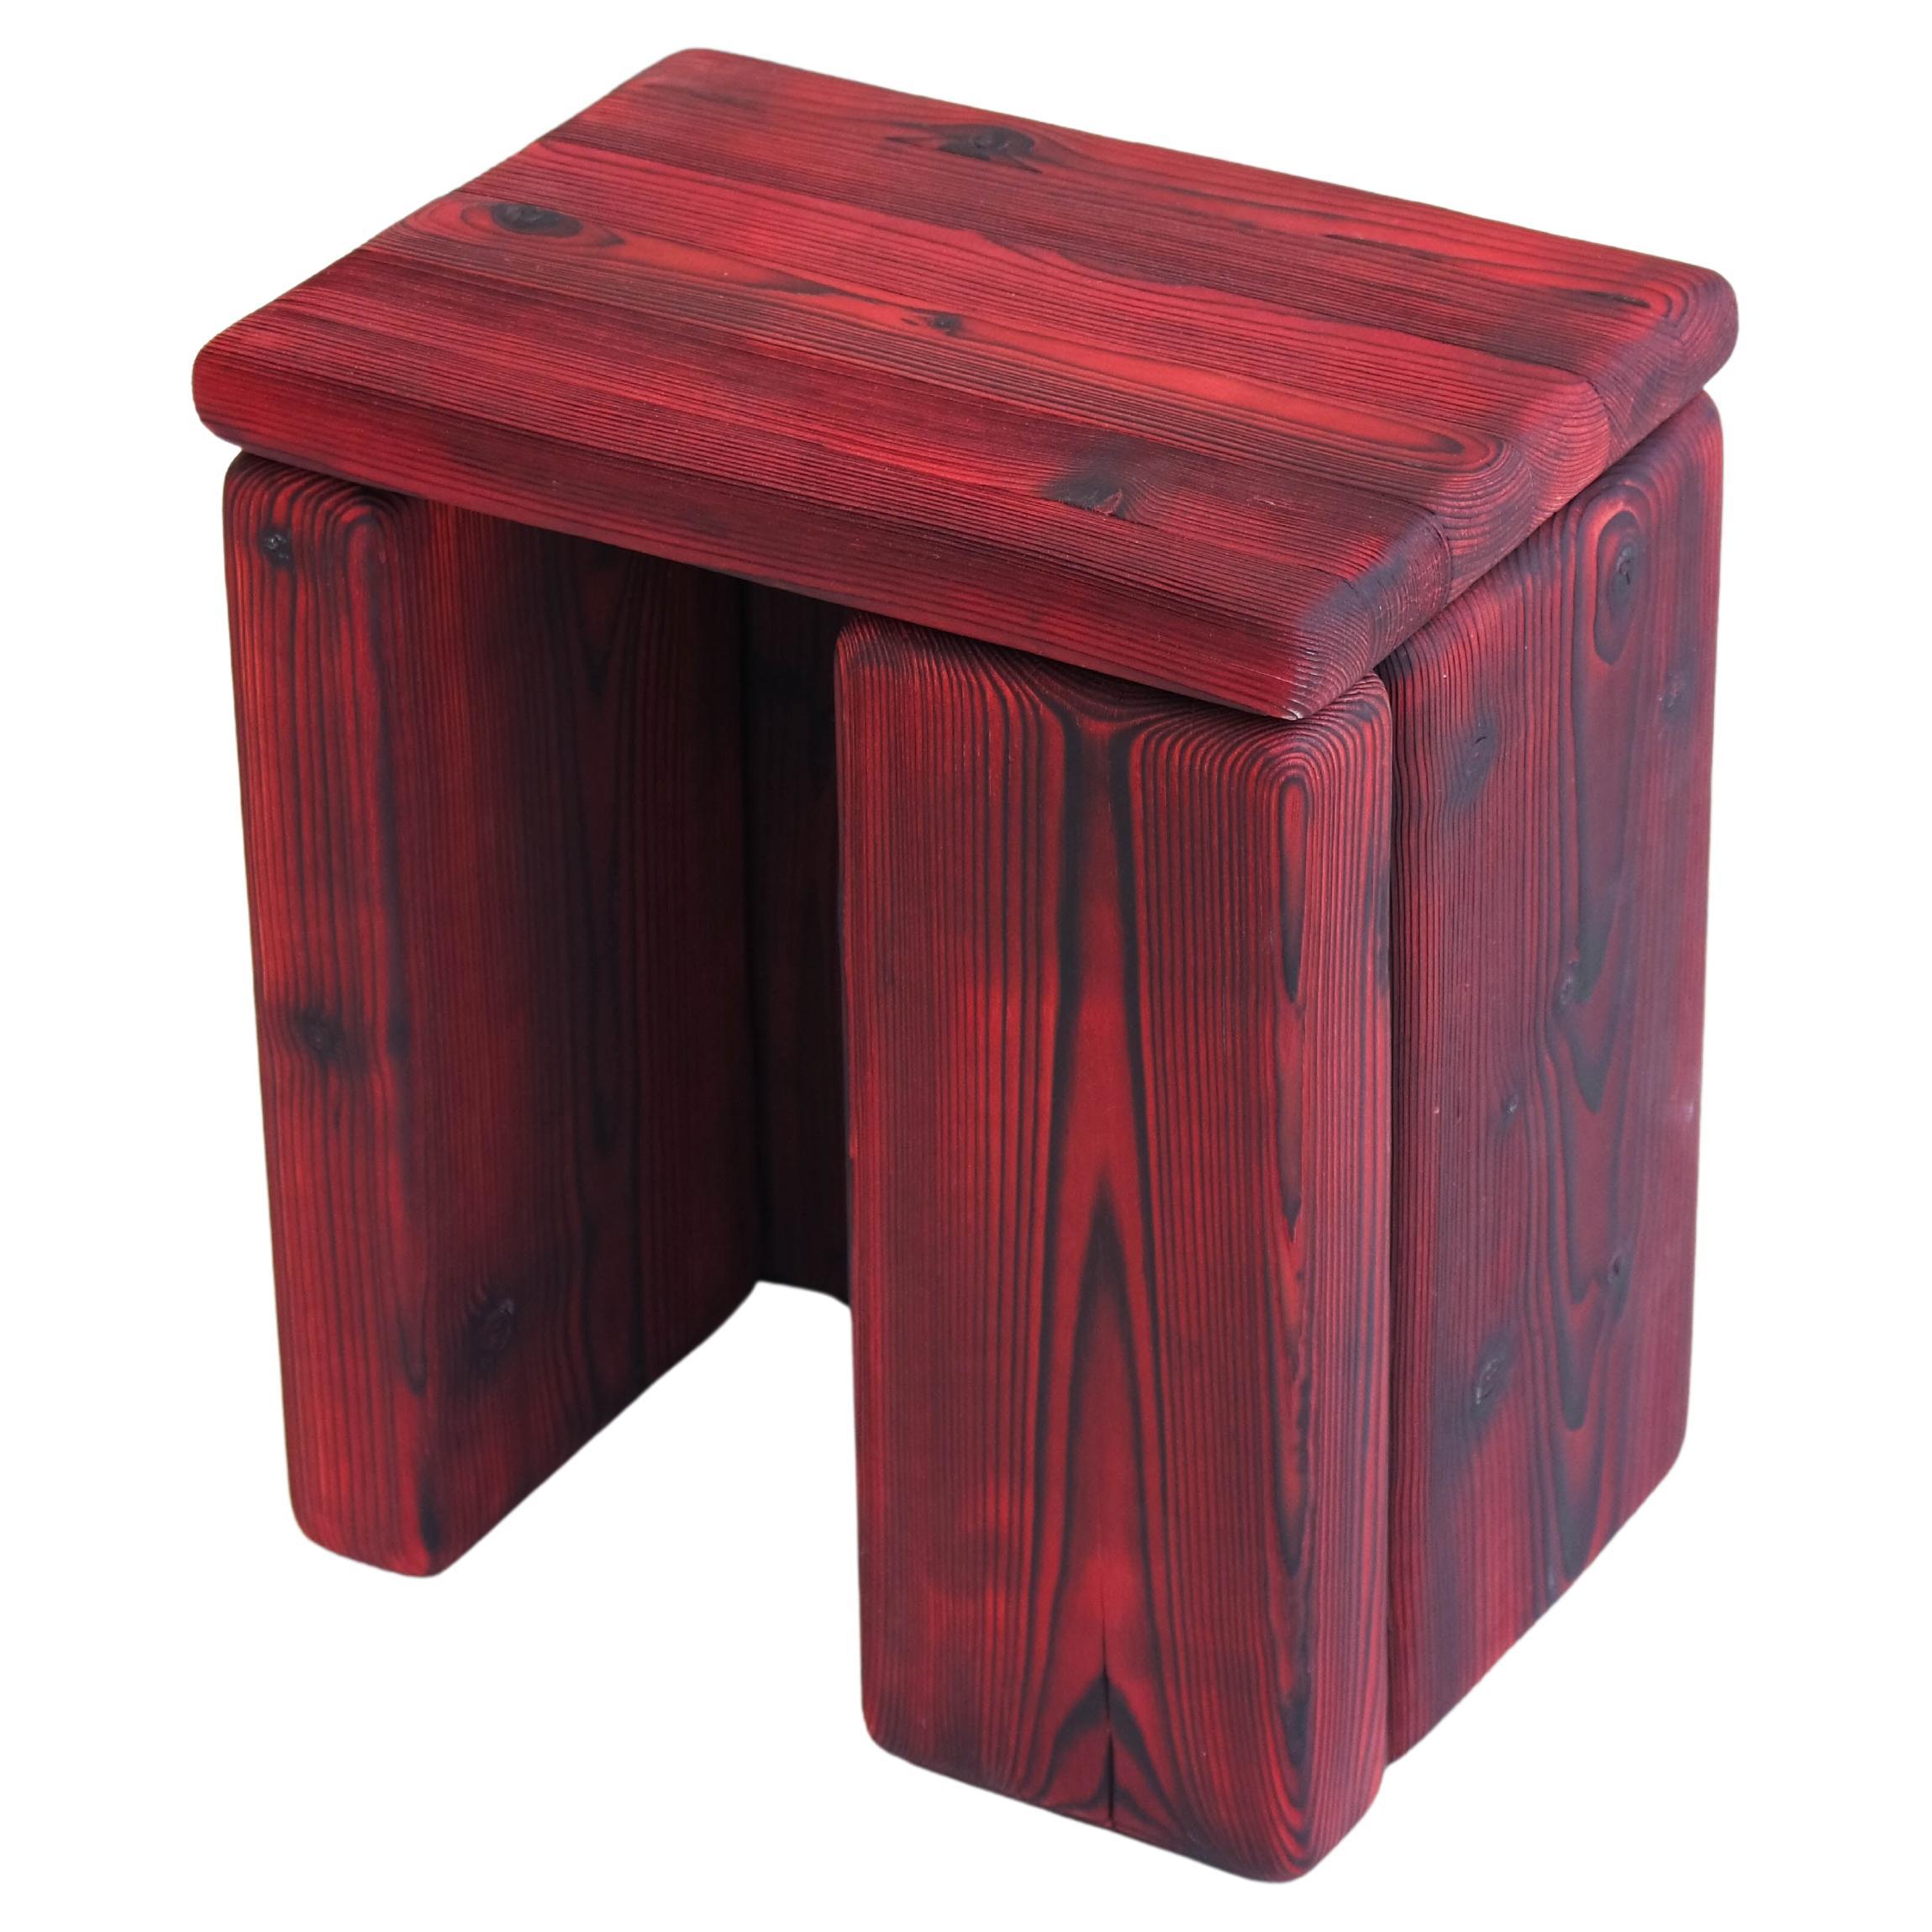 Timber Stool Burned Pine by Onno Adriaanse For Sale